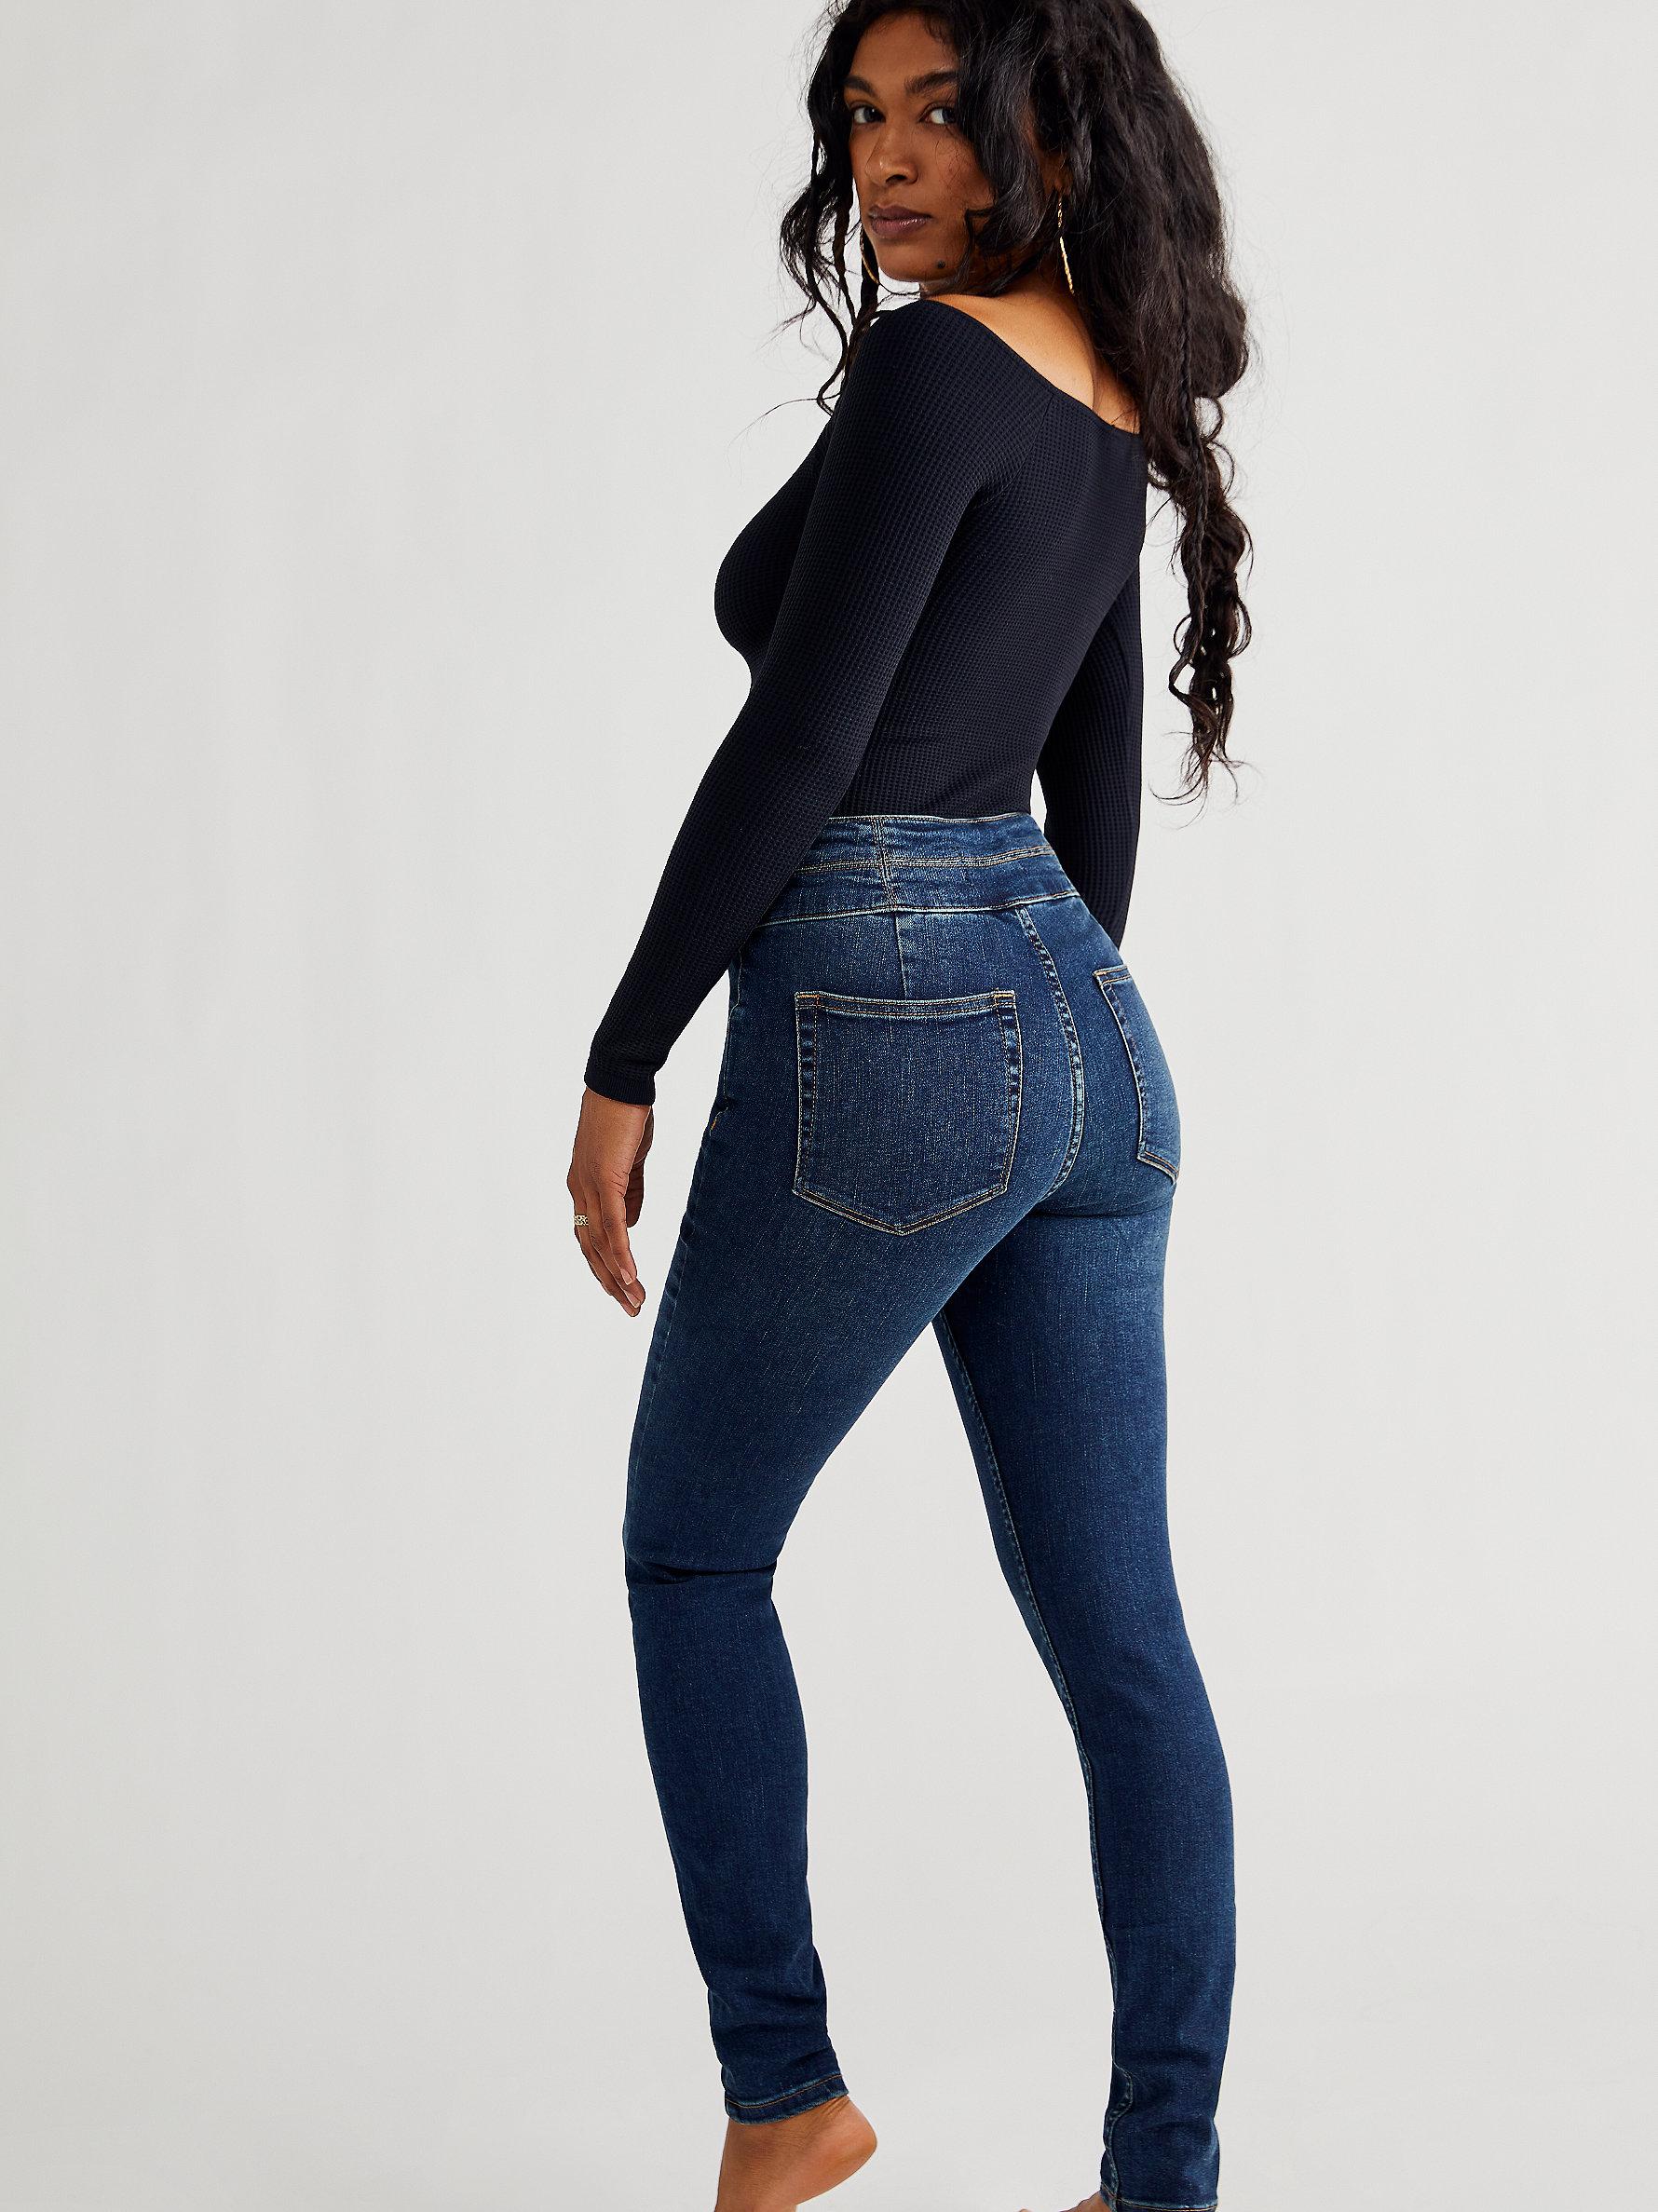 Free People Crvy High-rise Lace-up Skinny Jeans in Blue